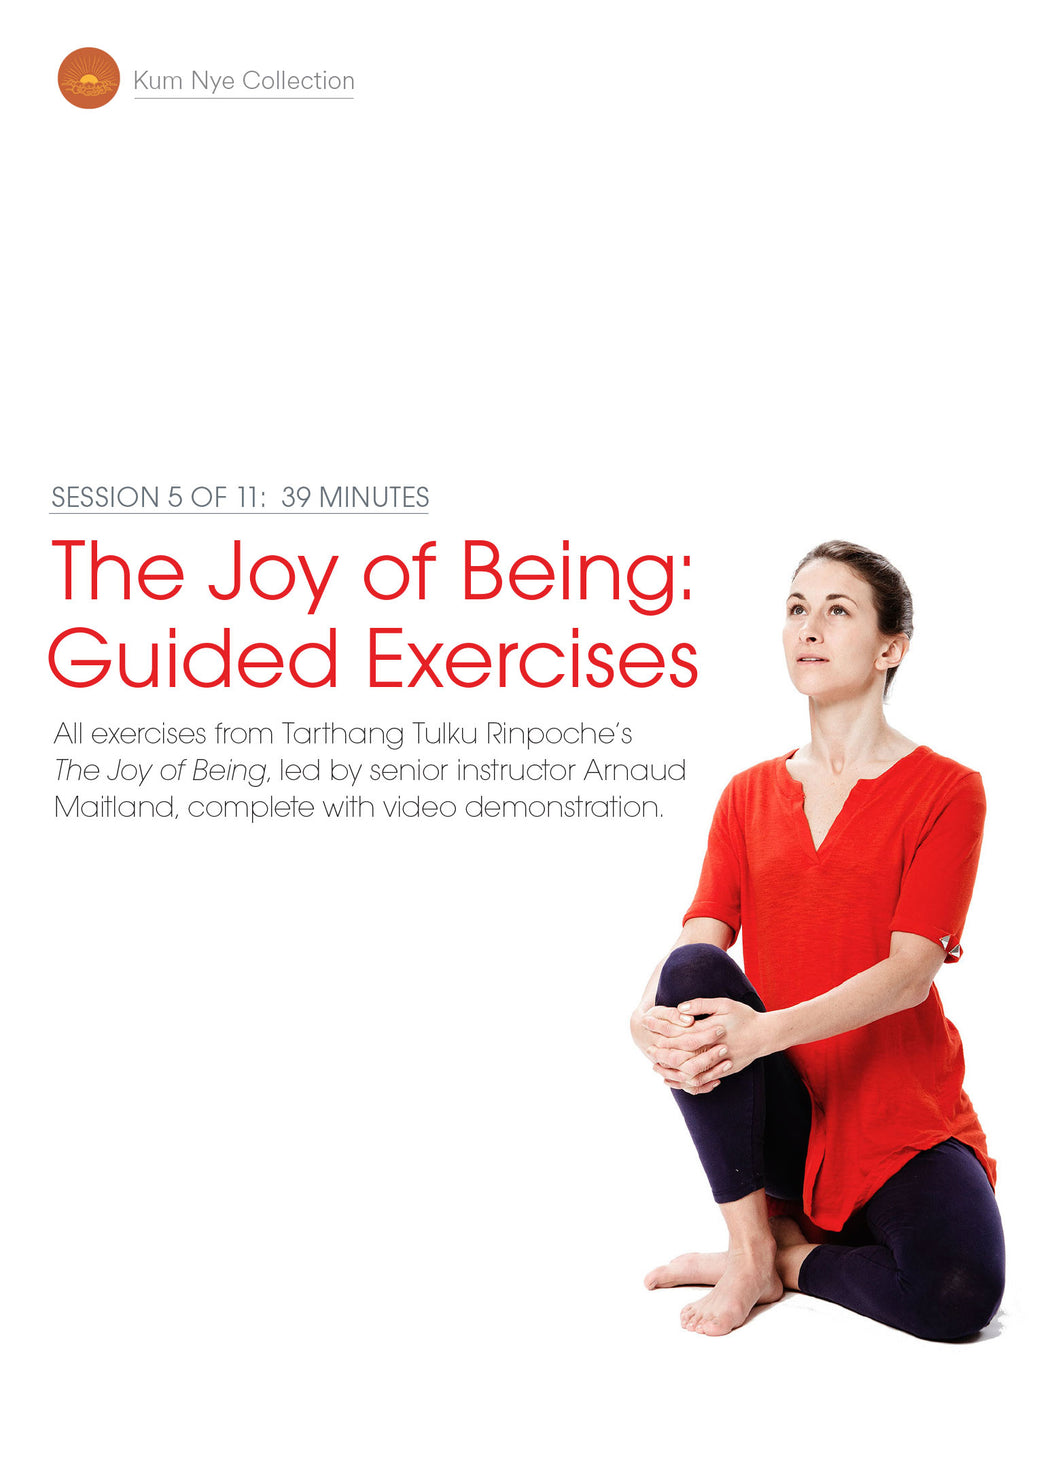 The Joy of Being; Guided Exercises, Session 5